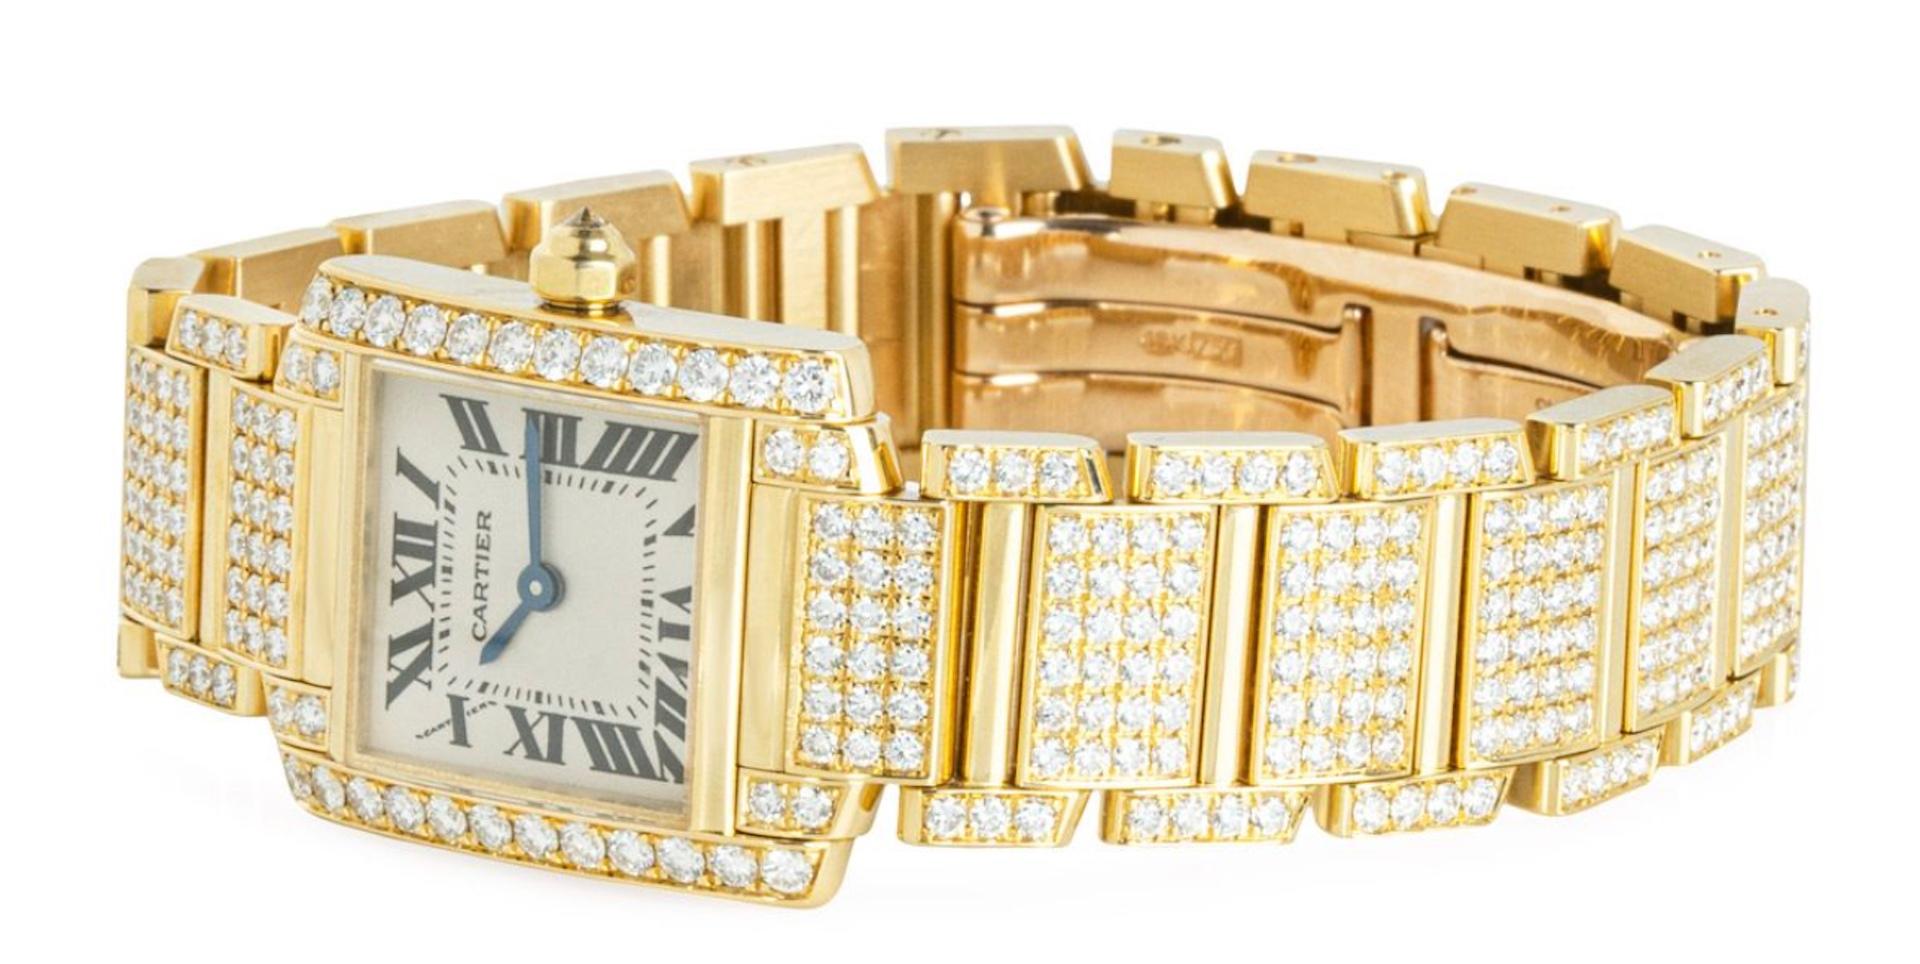 Cartier Tank Franchise Diamond Set 2364 Watch In Excellent Condition For Sale In London, GB